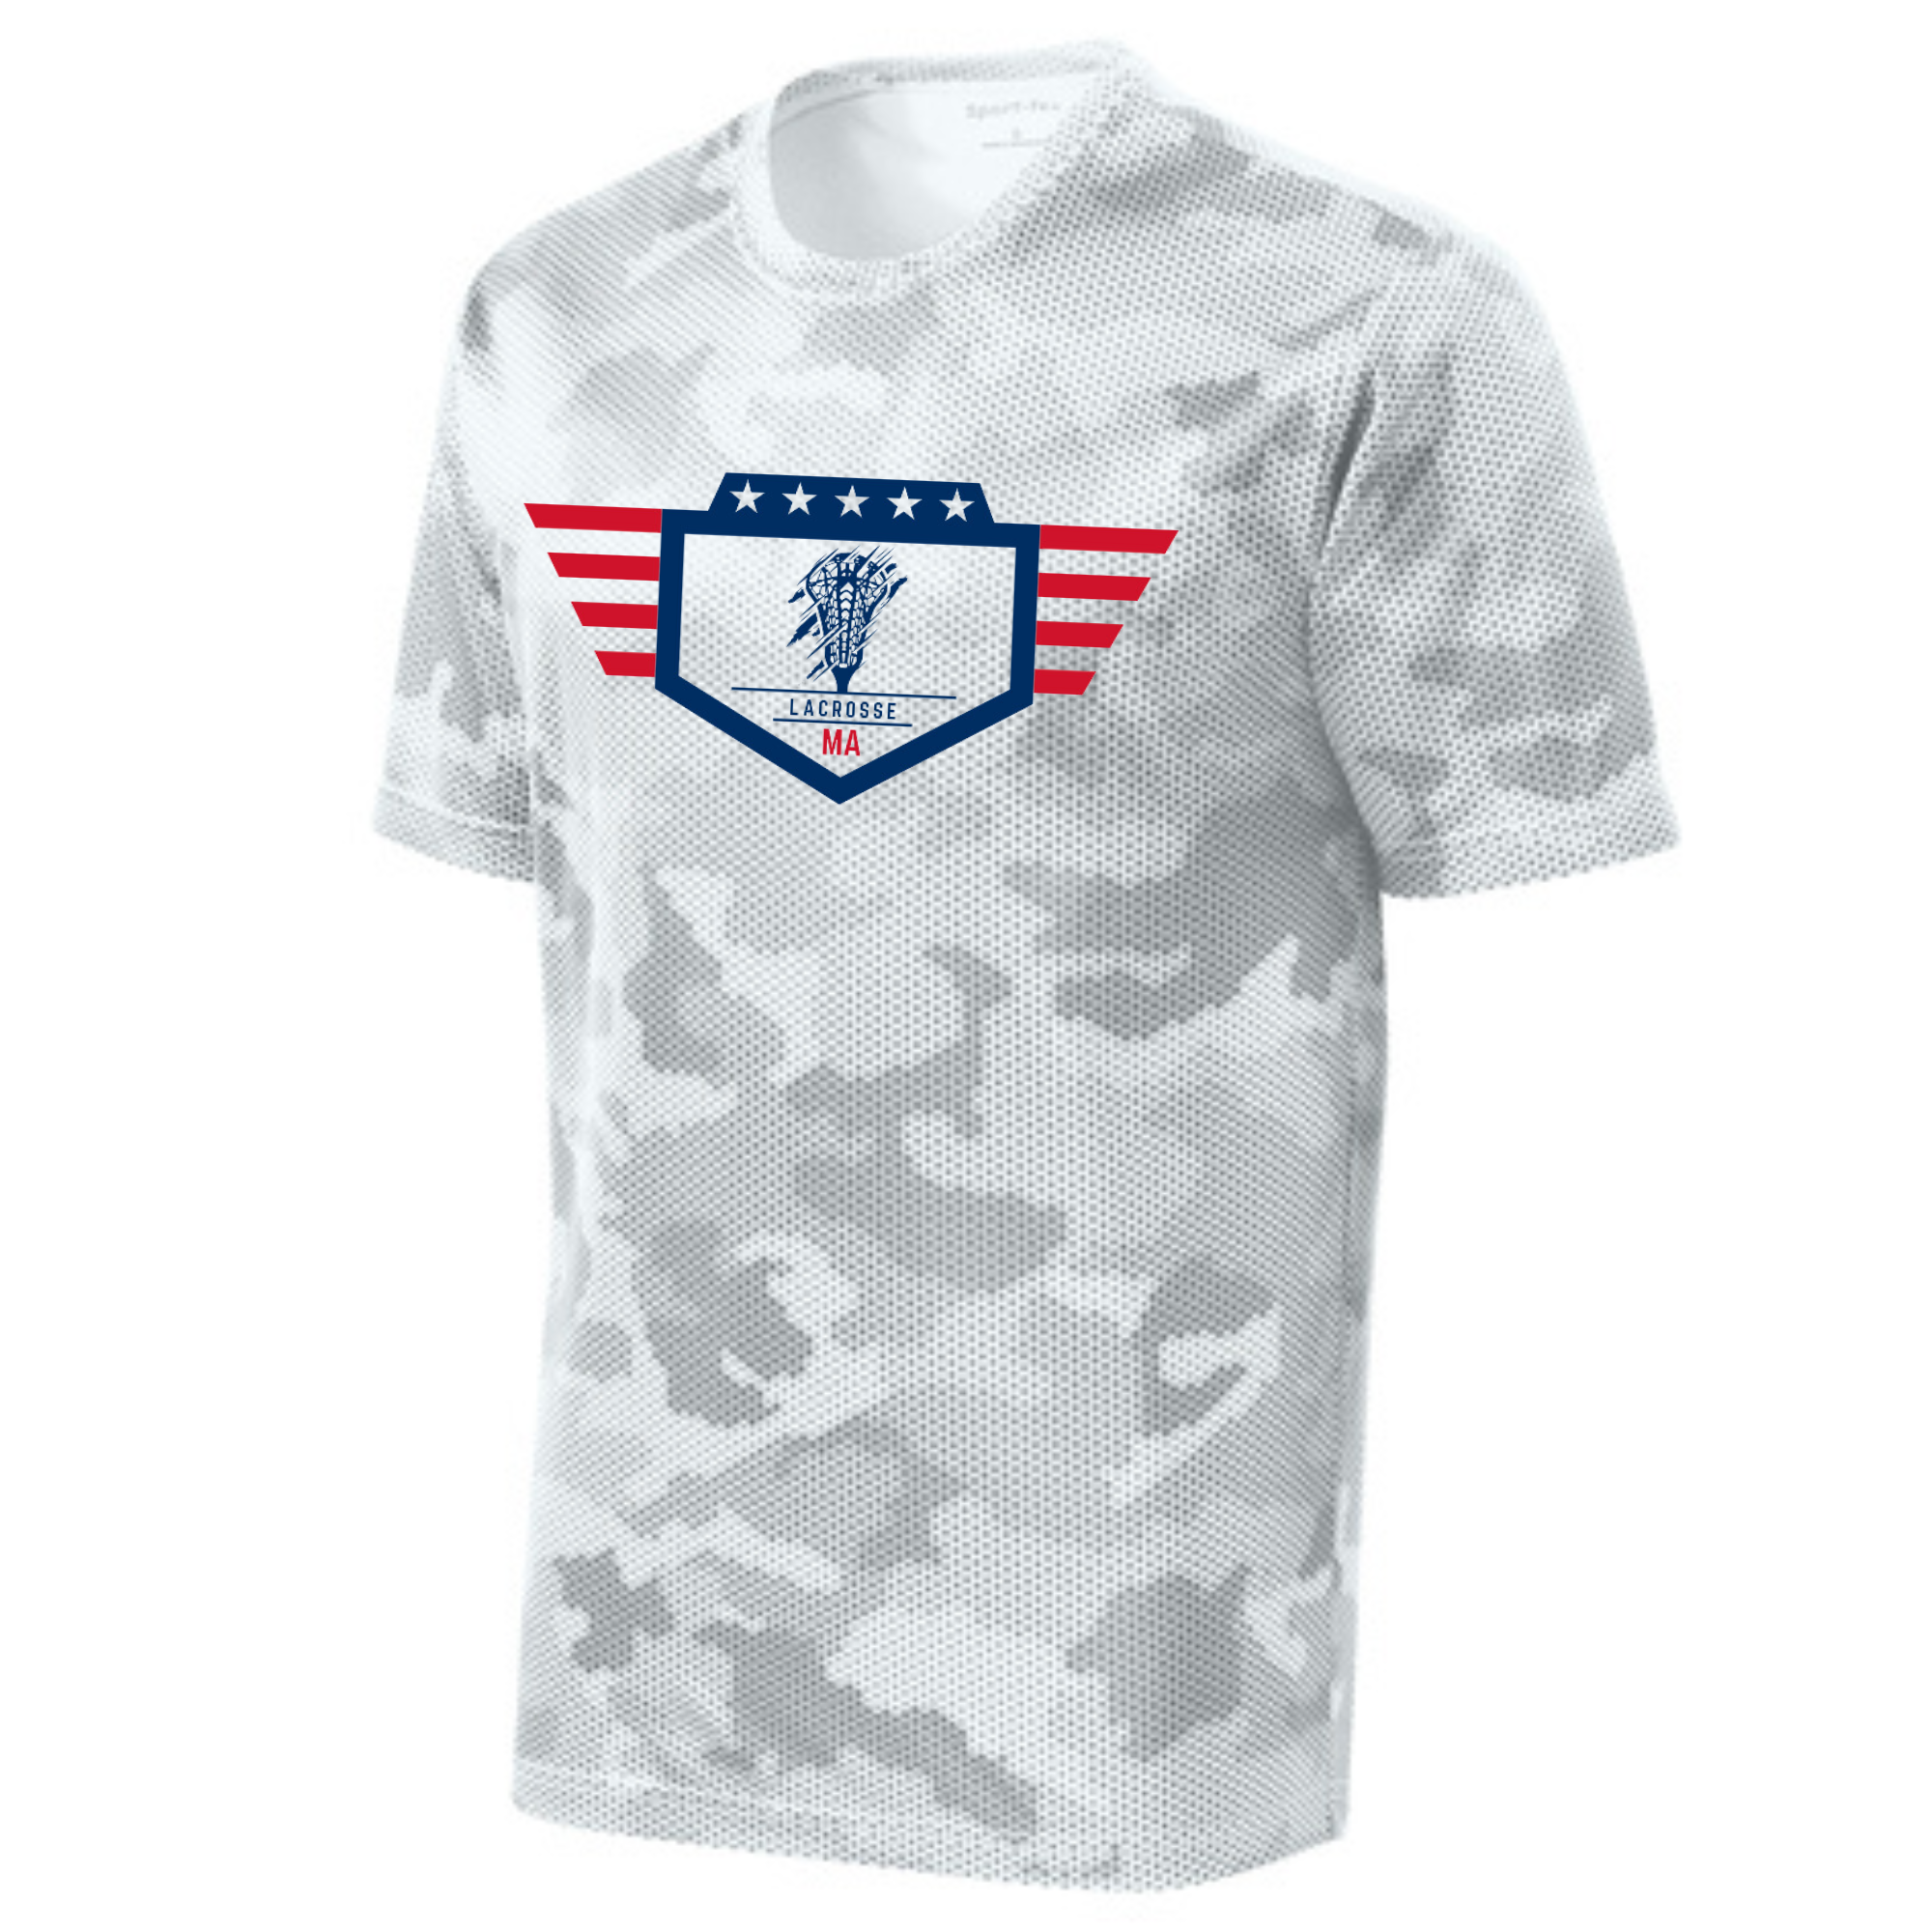 TUNEUP TOURNAMENT MA LACROSSE CAMOHEX YOUTH TEE - WHITE